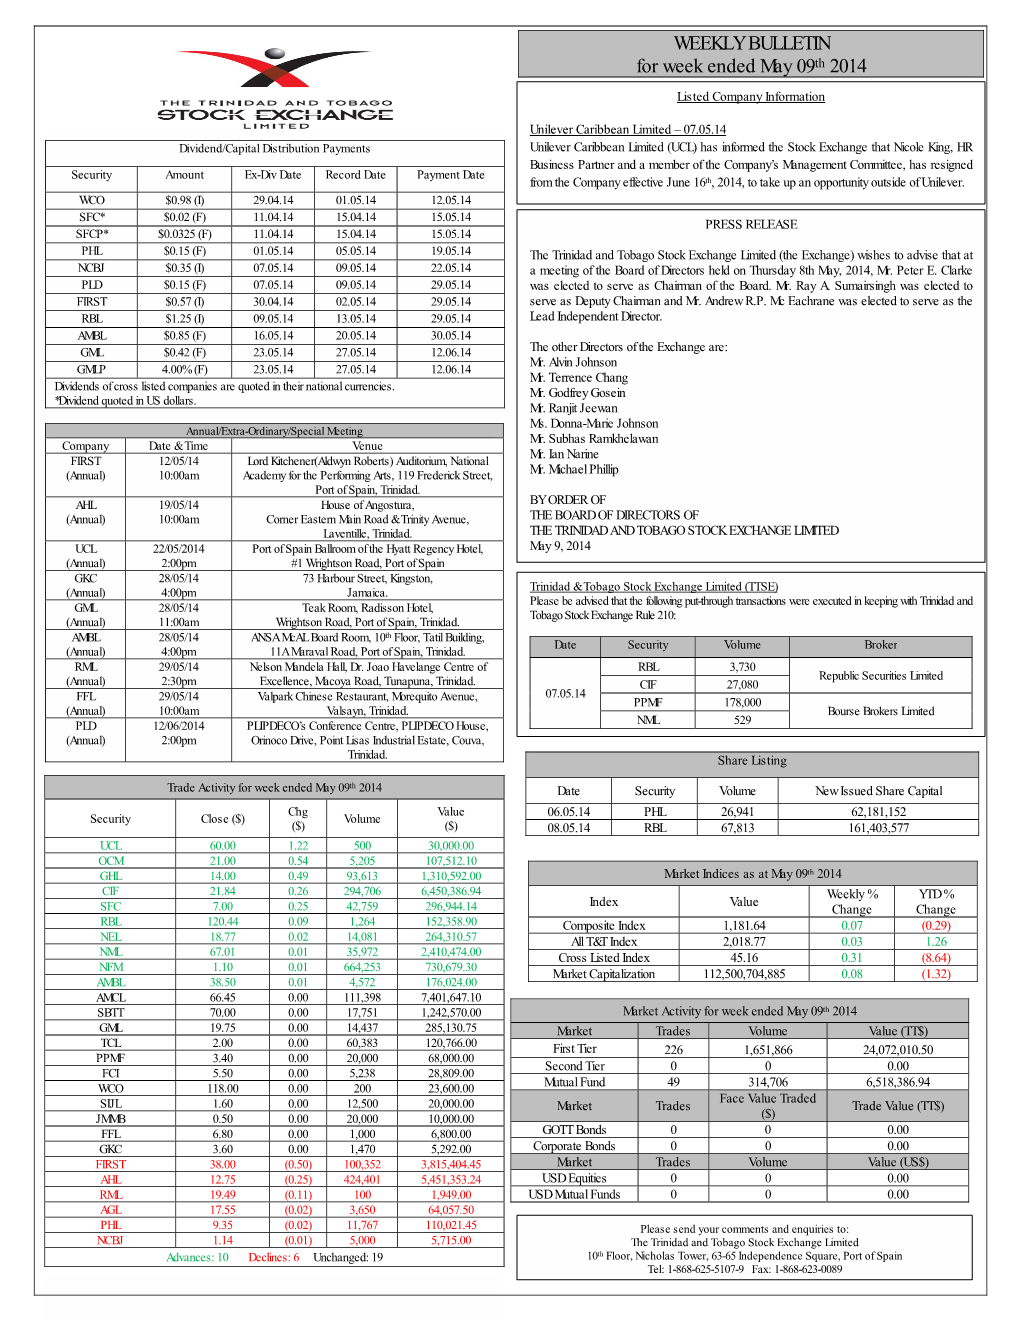 WEEKLY BULLETIN for Week Ended May 09Th 2014